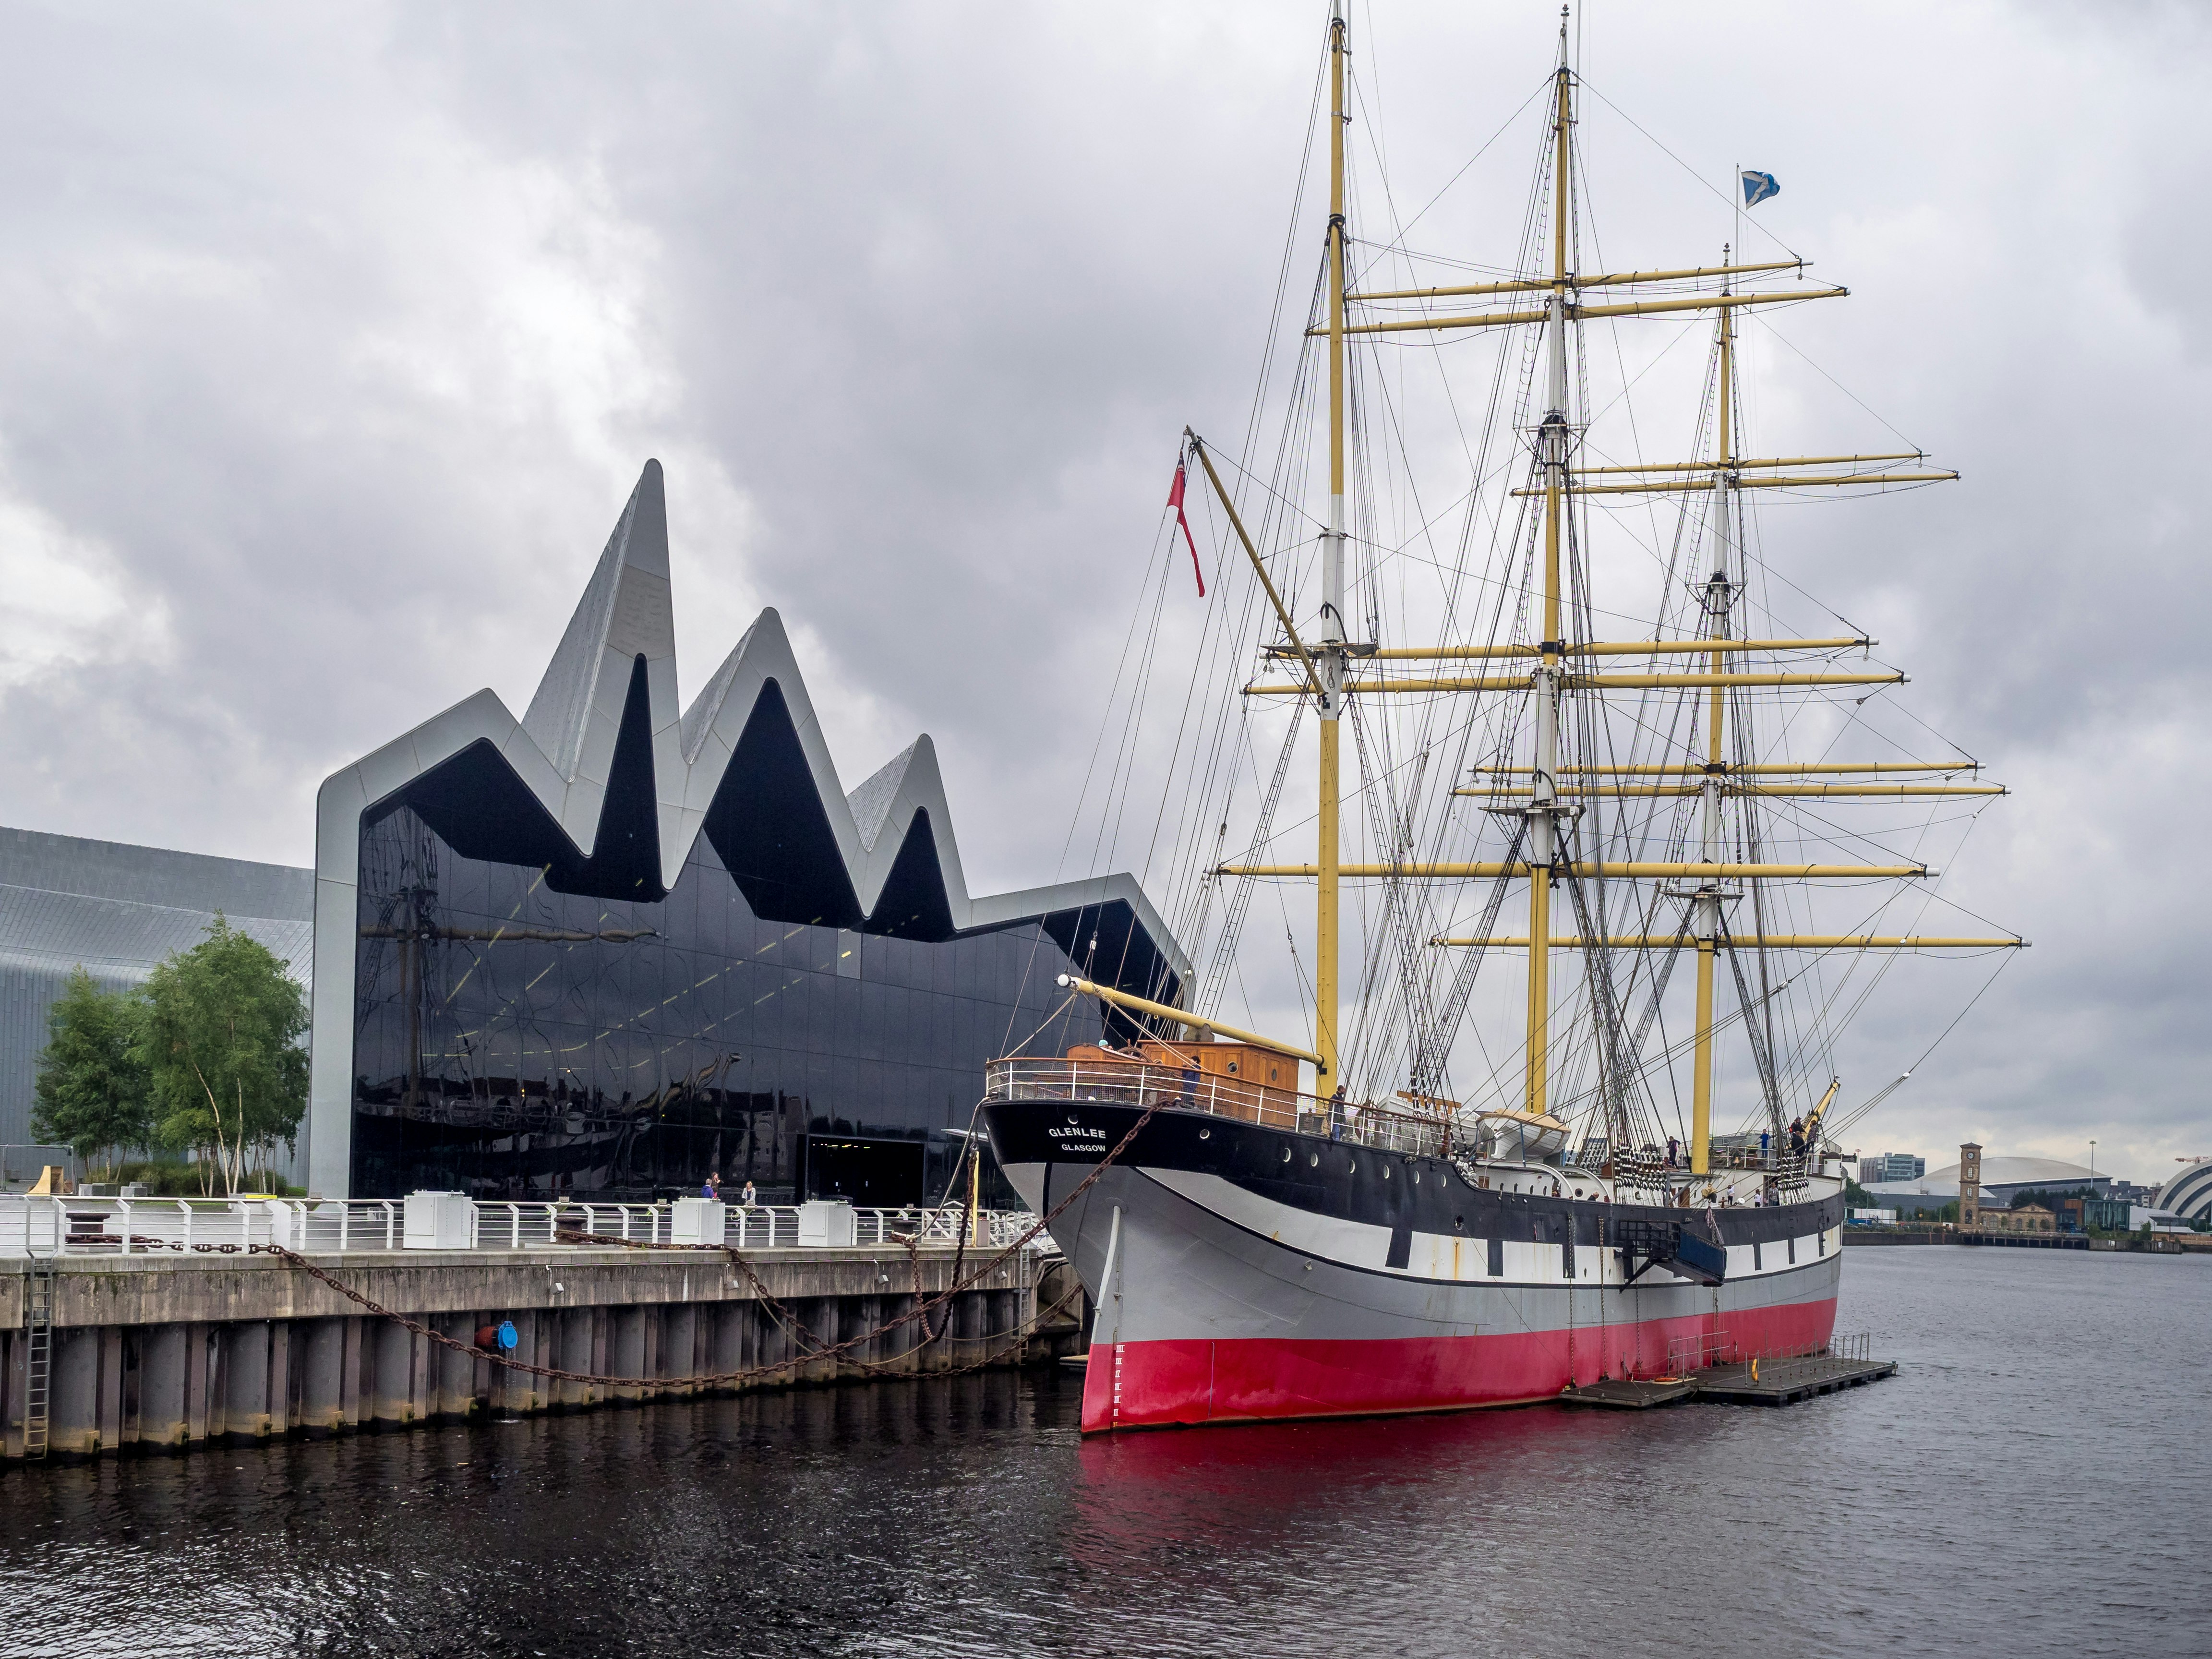 Glasgow's striking modern Riverside Museum building with its jagged glass facade, and the three-masted Tall Ship in front.